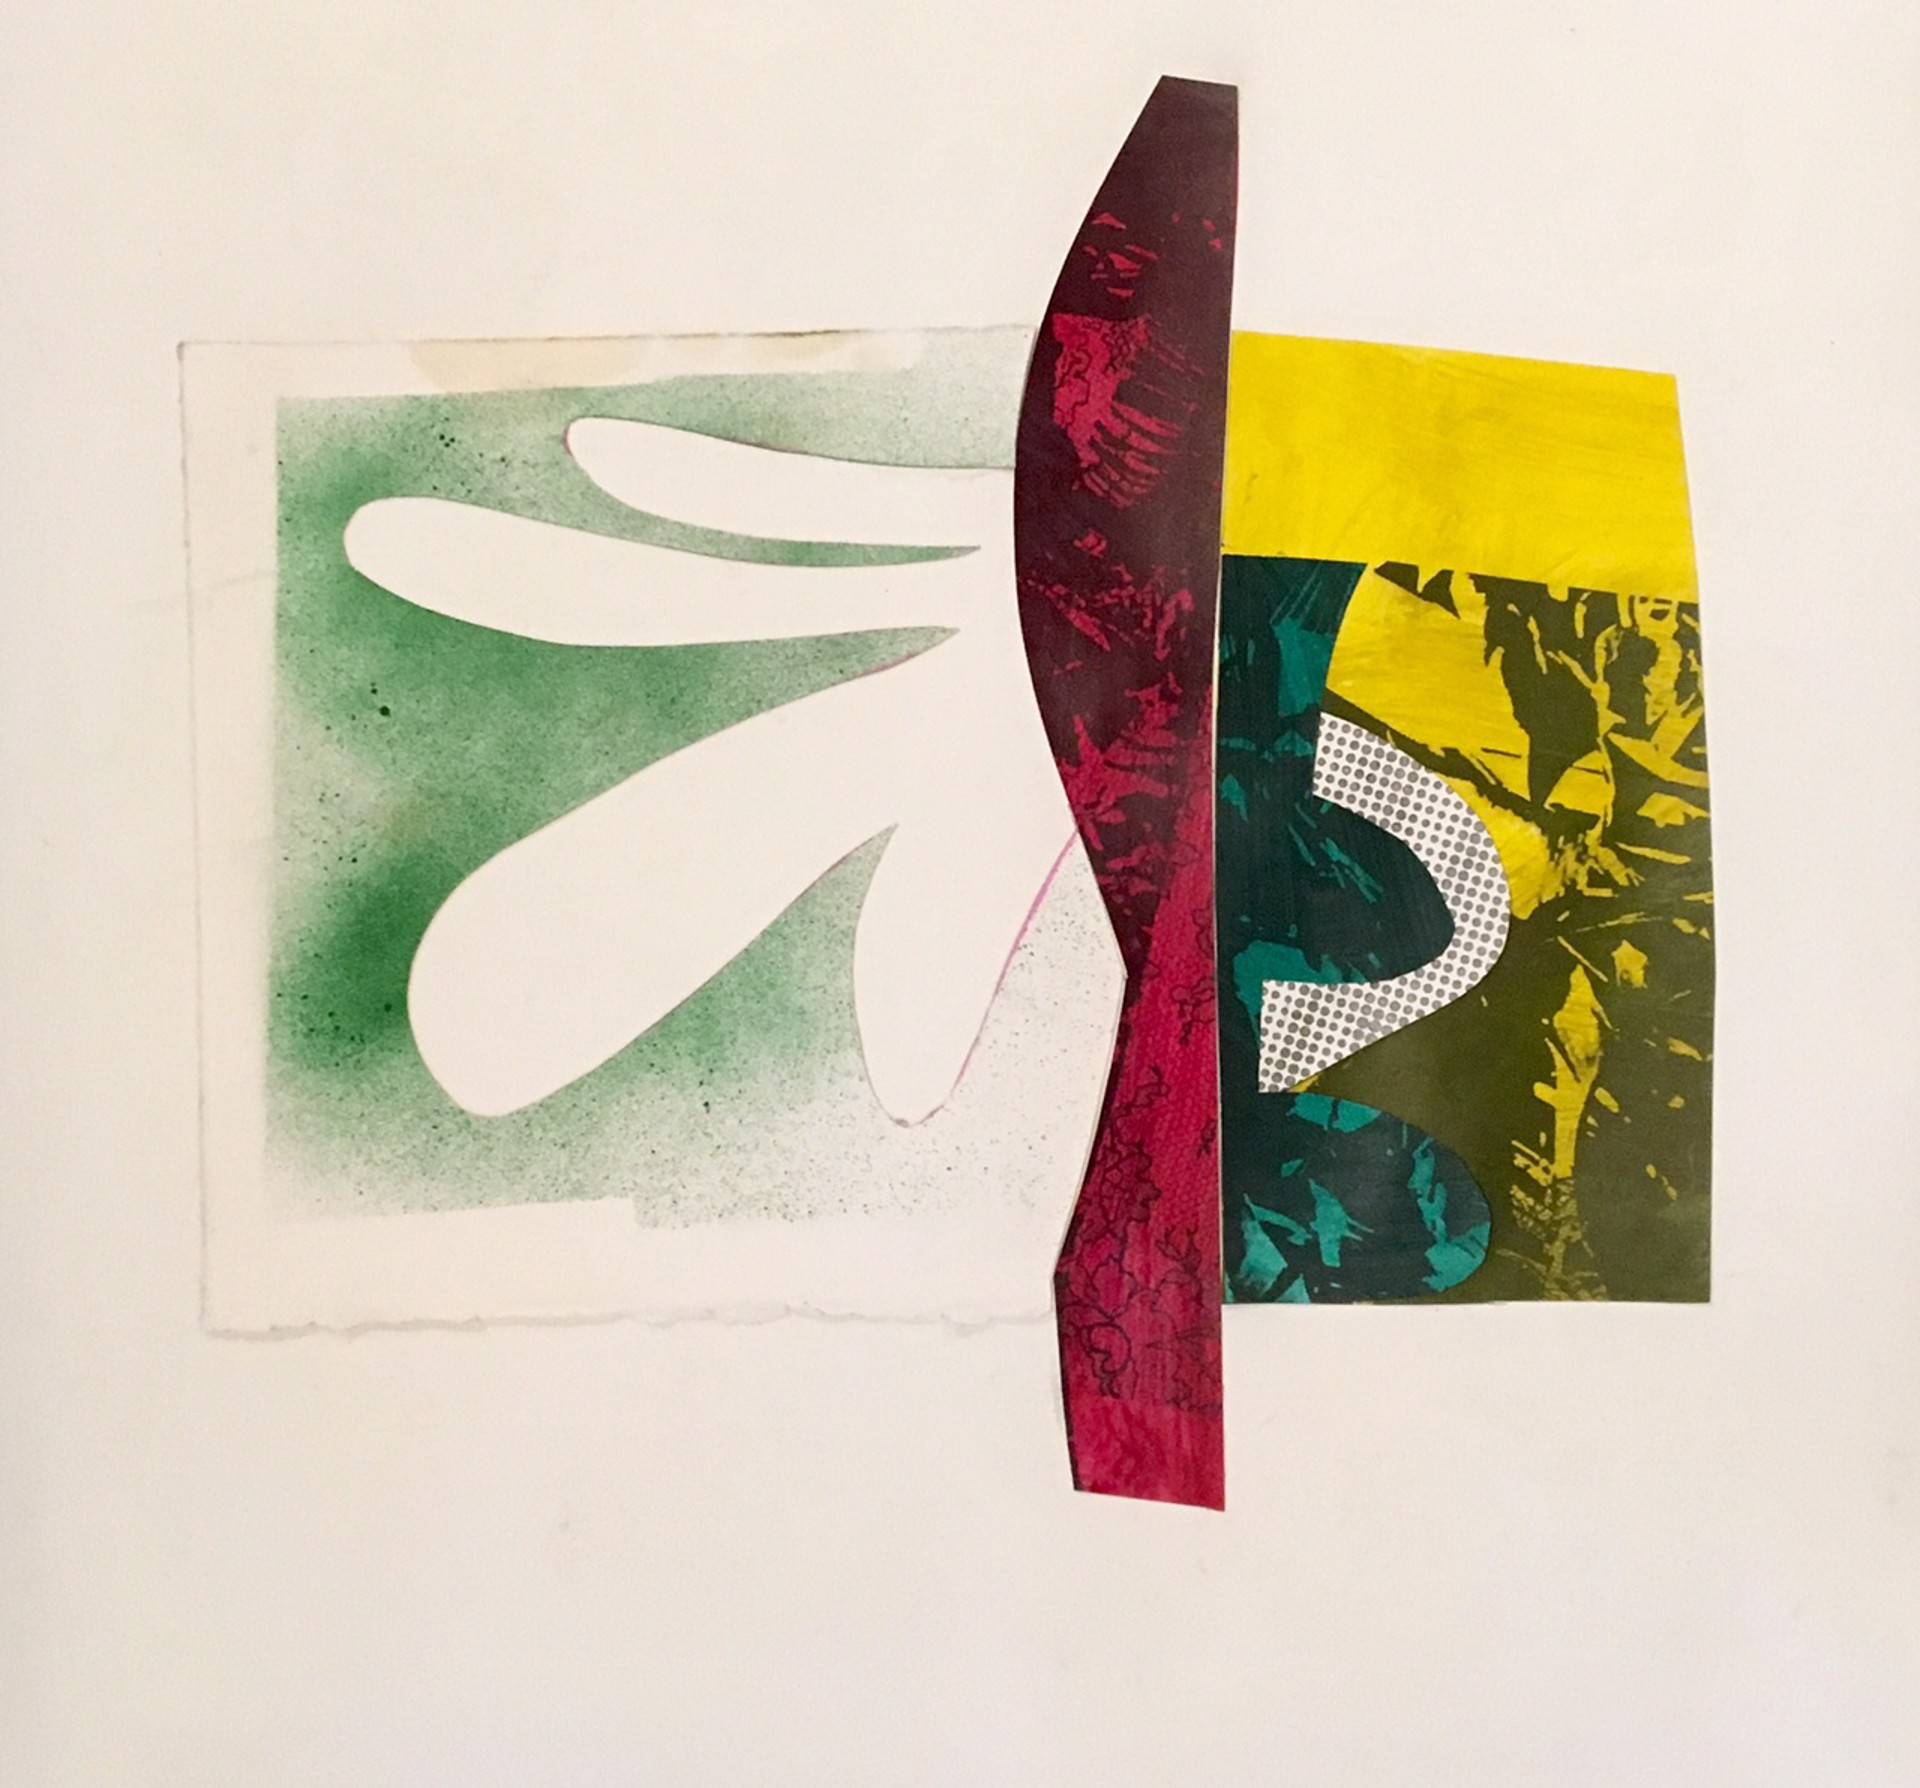 Untitled (palm tree collage) by Sheldon Greenberg